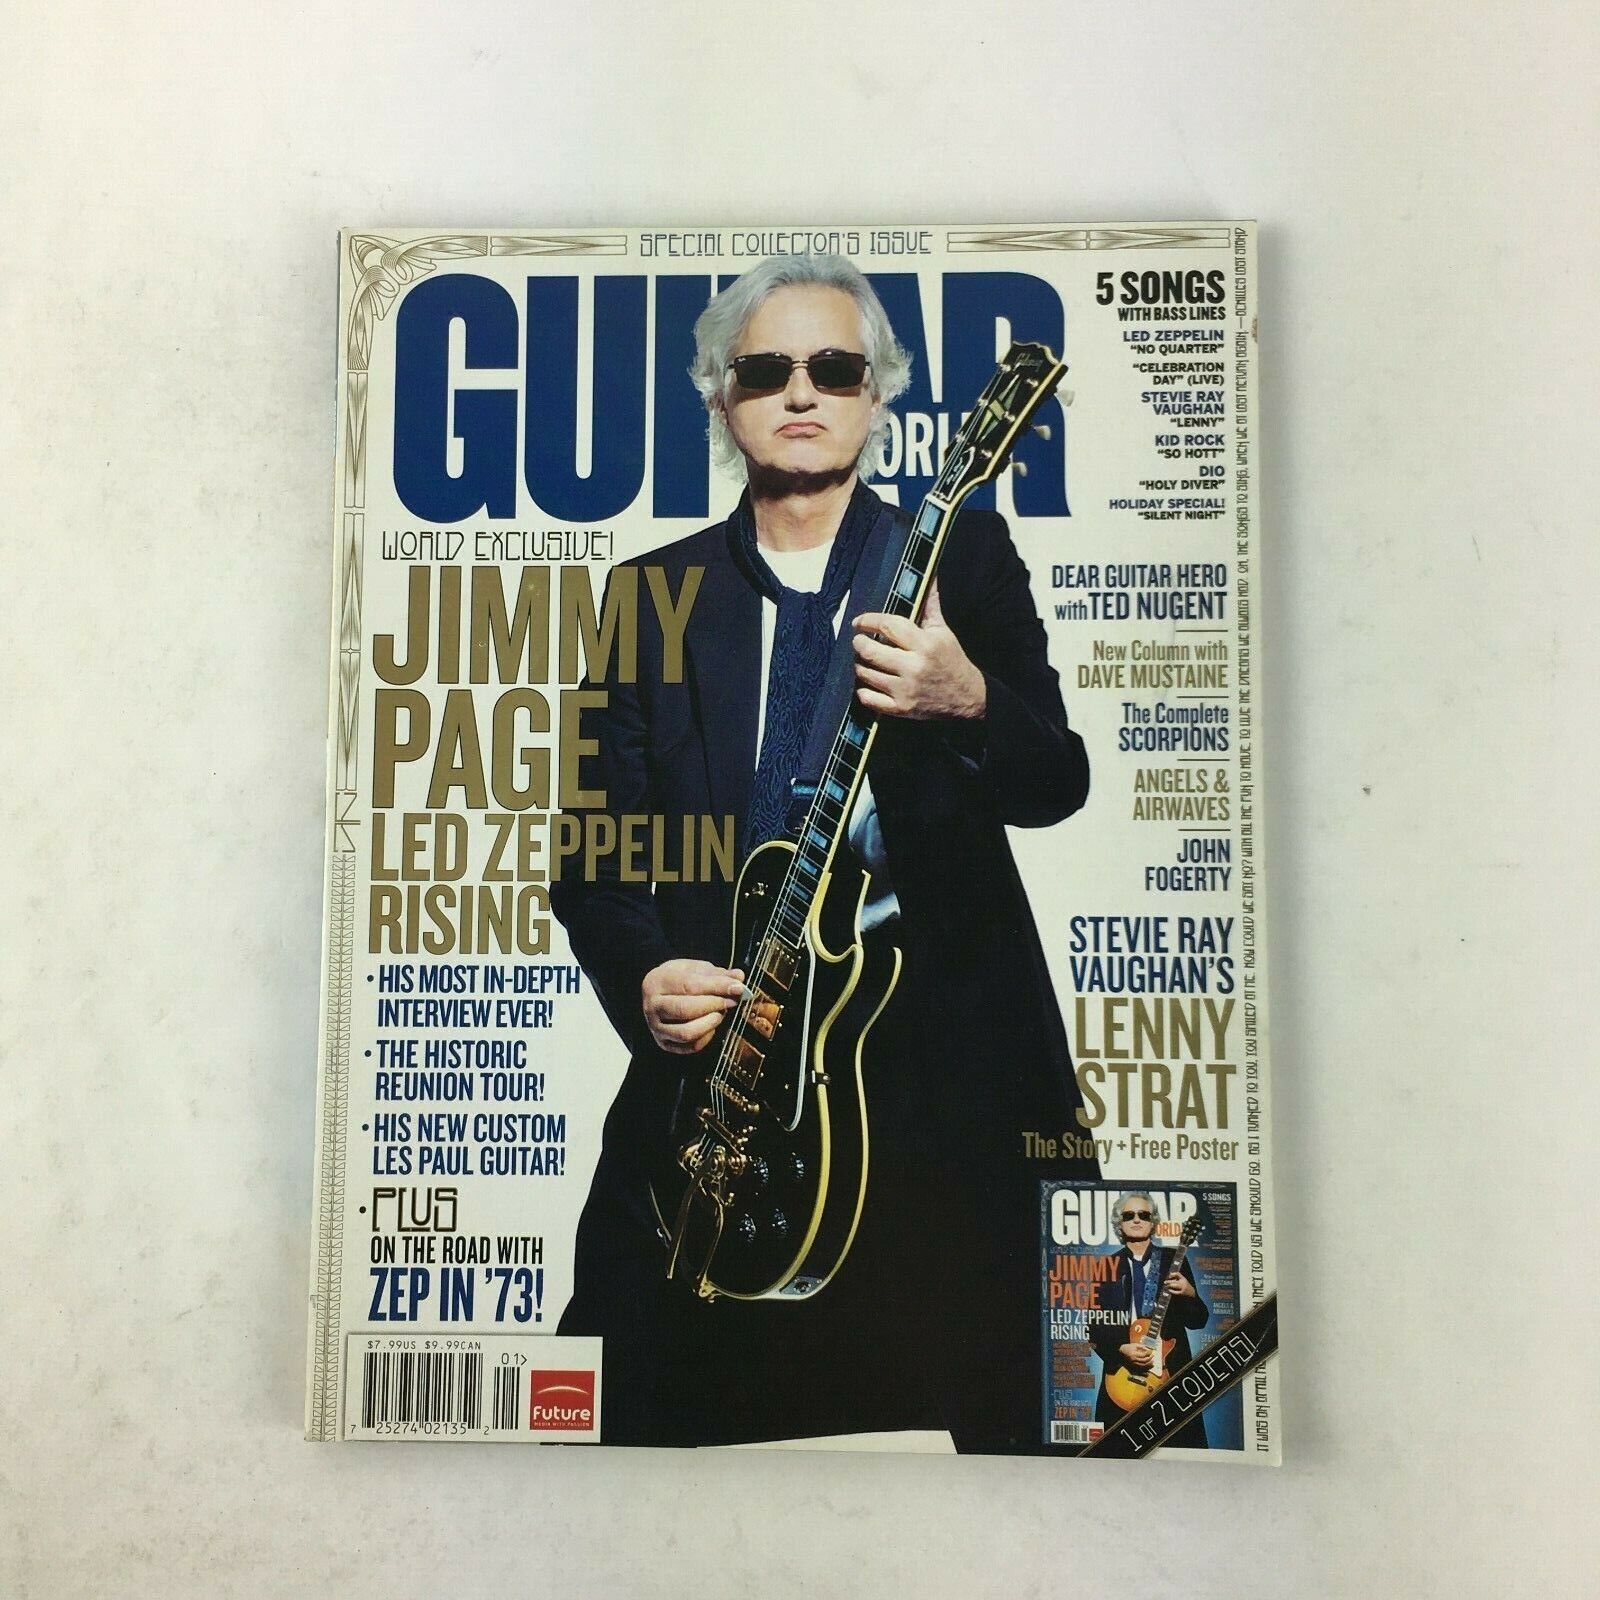 Primary image for Guitar World Magazine Jimmy Page Led Zeppelin Rising Lenny Strat Stevie Ray